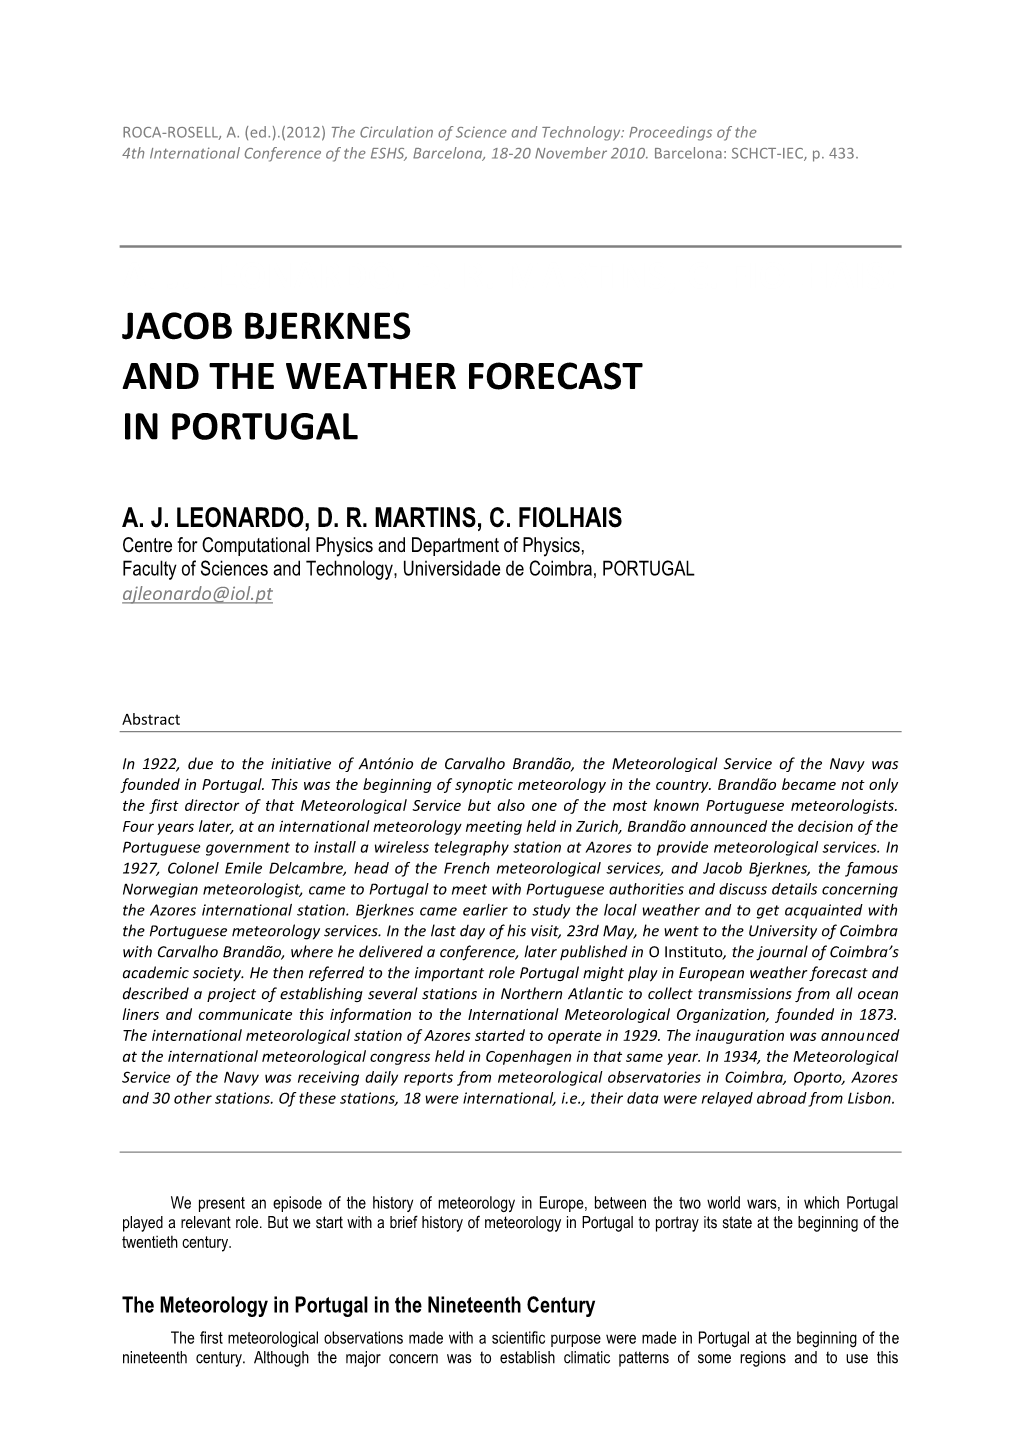 Jacob Bjerknes and the Weather Forecast in Portugal